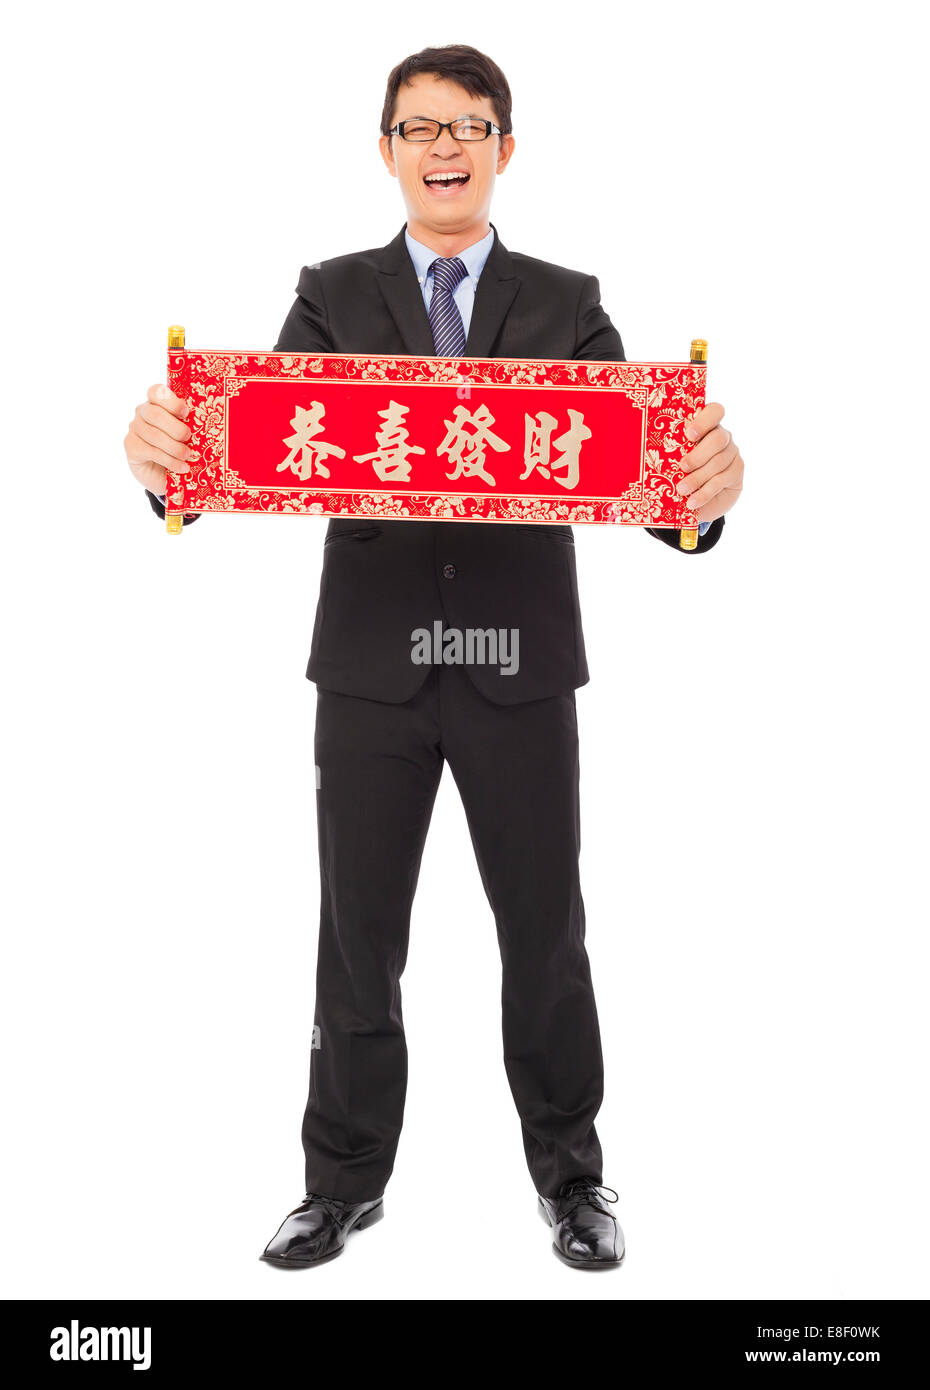 young businessman  holding a congratulations reel. happy new year blessings Stock Photo